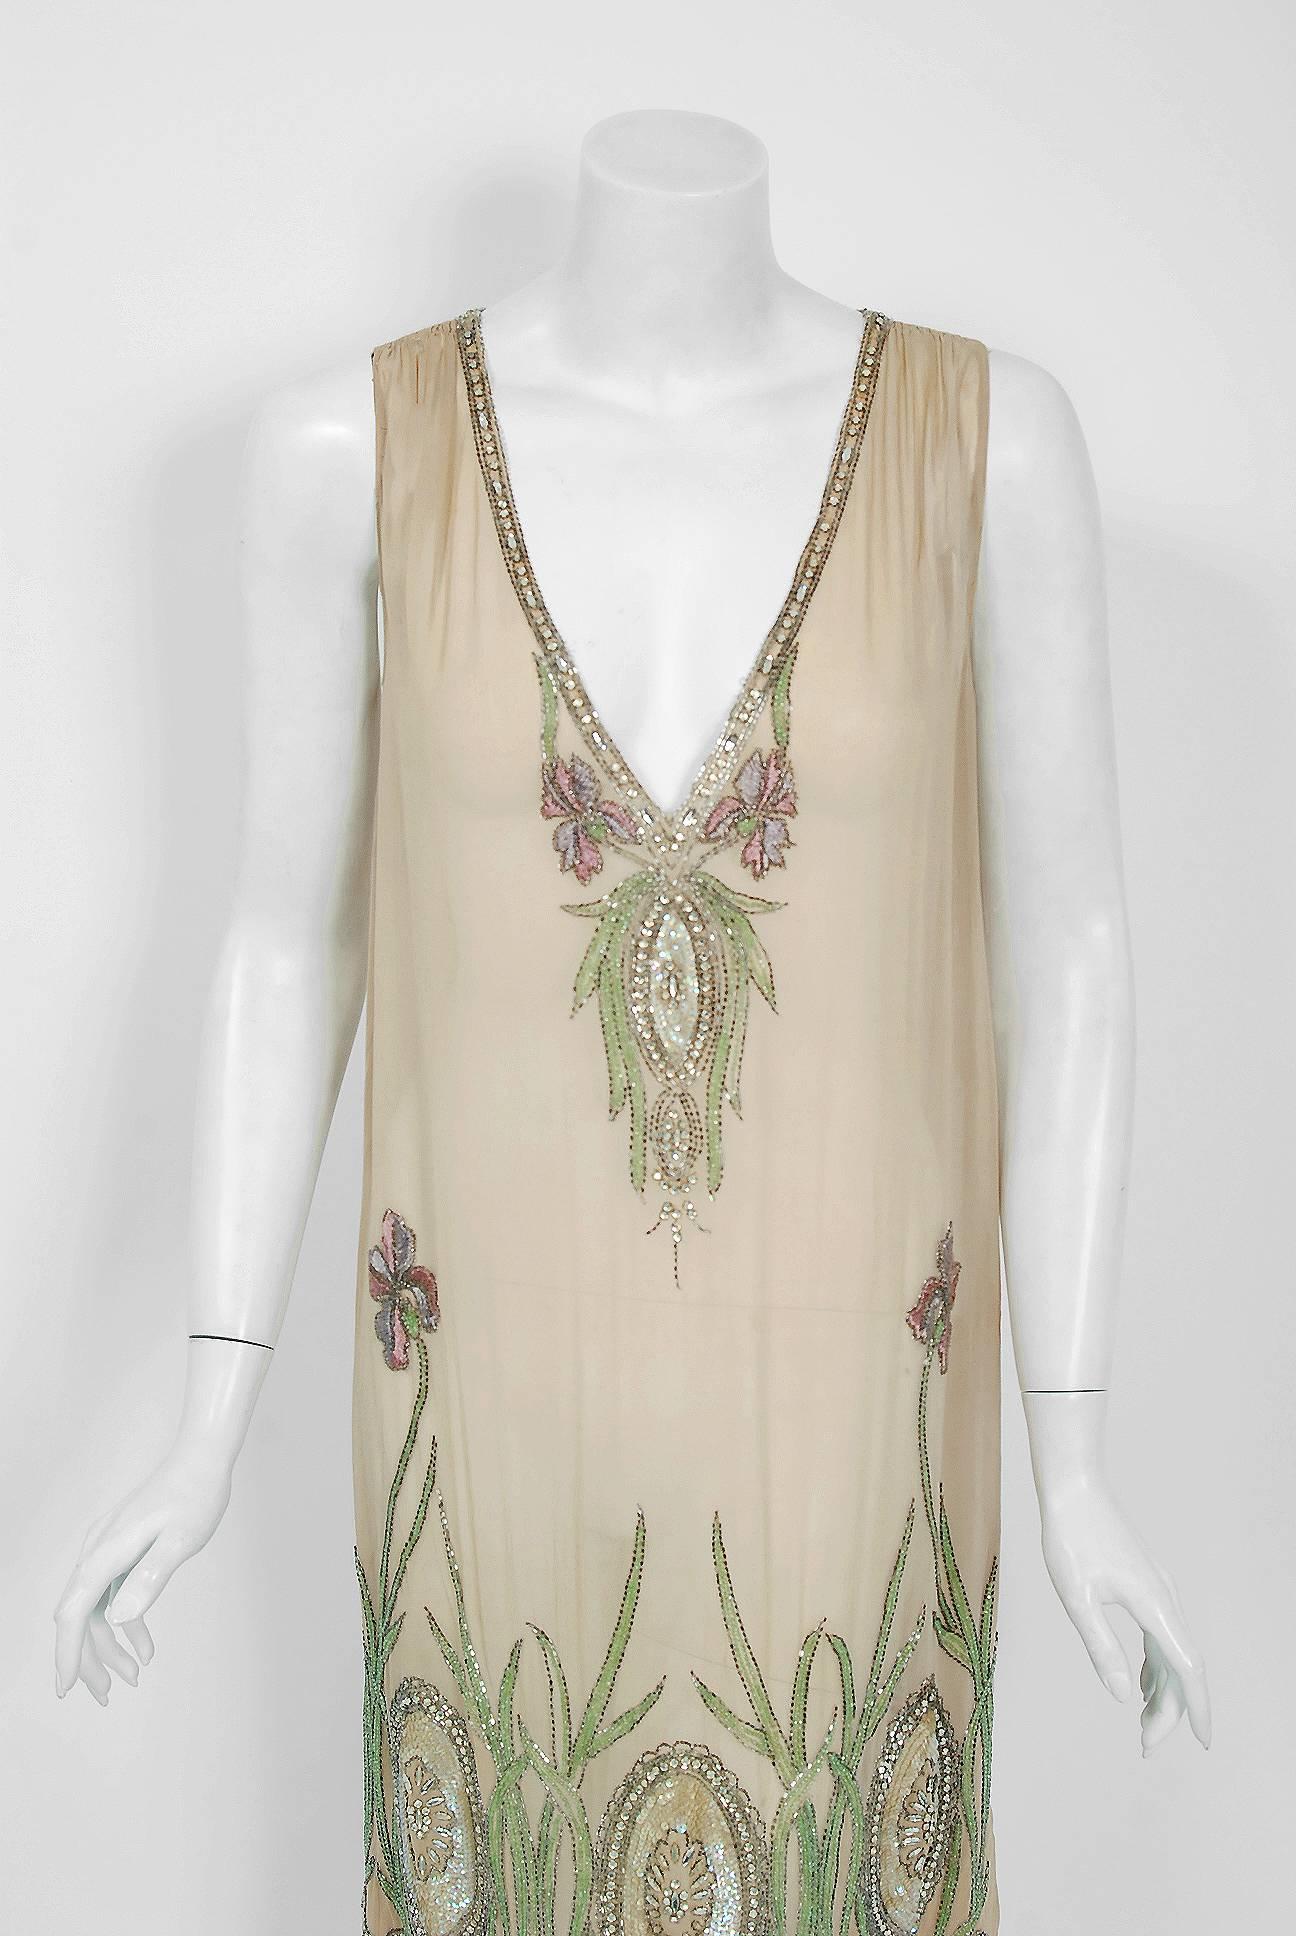 There are lots of lovely 1920's garments still around, but every once in a while I come across one that sets my heart a flutter! This is an extraordinarily beautiful and exceptional French couture museum quality nude silk-chiffon dance dress. The